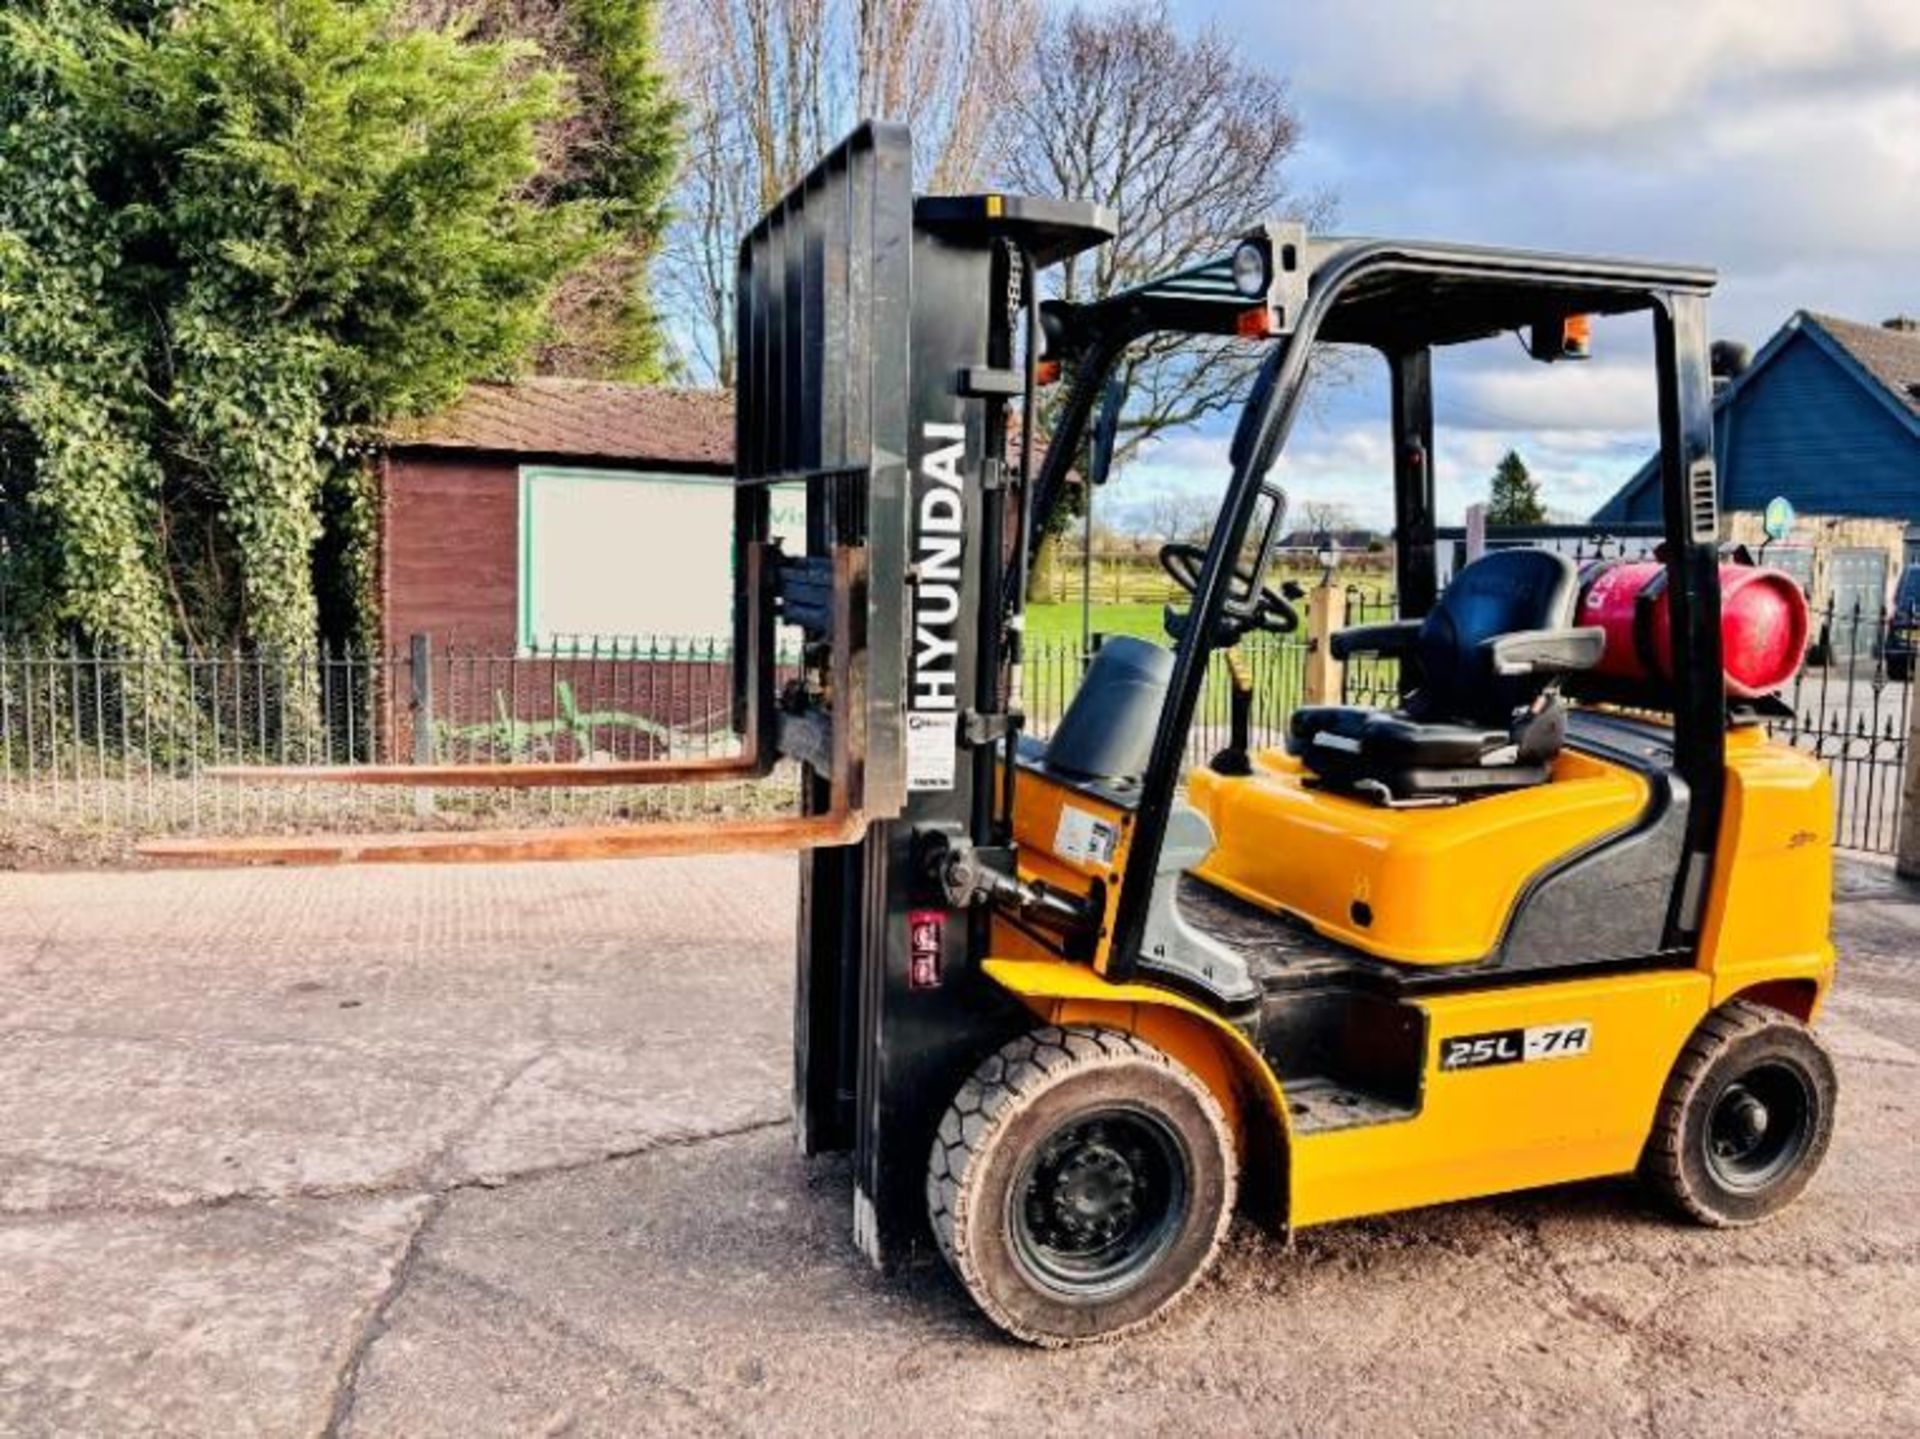 HYUNDAI 25L-7A CONTAINER SPEC FORKLIFT *YEAR 2018, 2172 HOURS* C/W SIDE SHIFT - Image 14 of 17